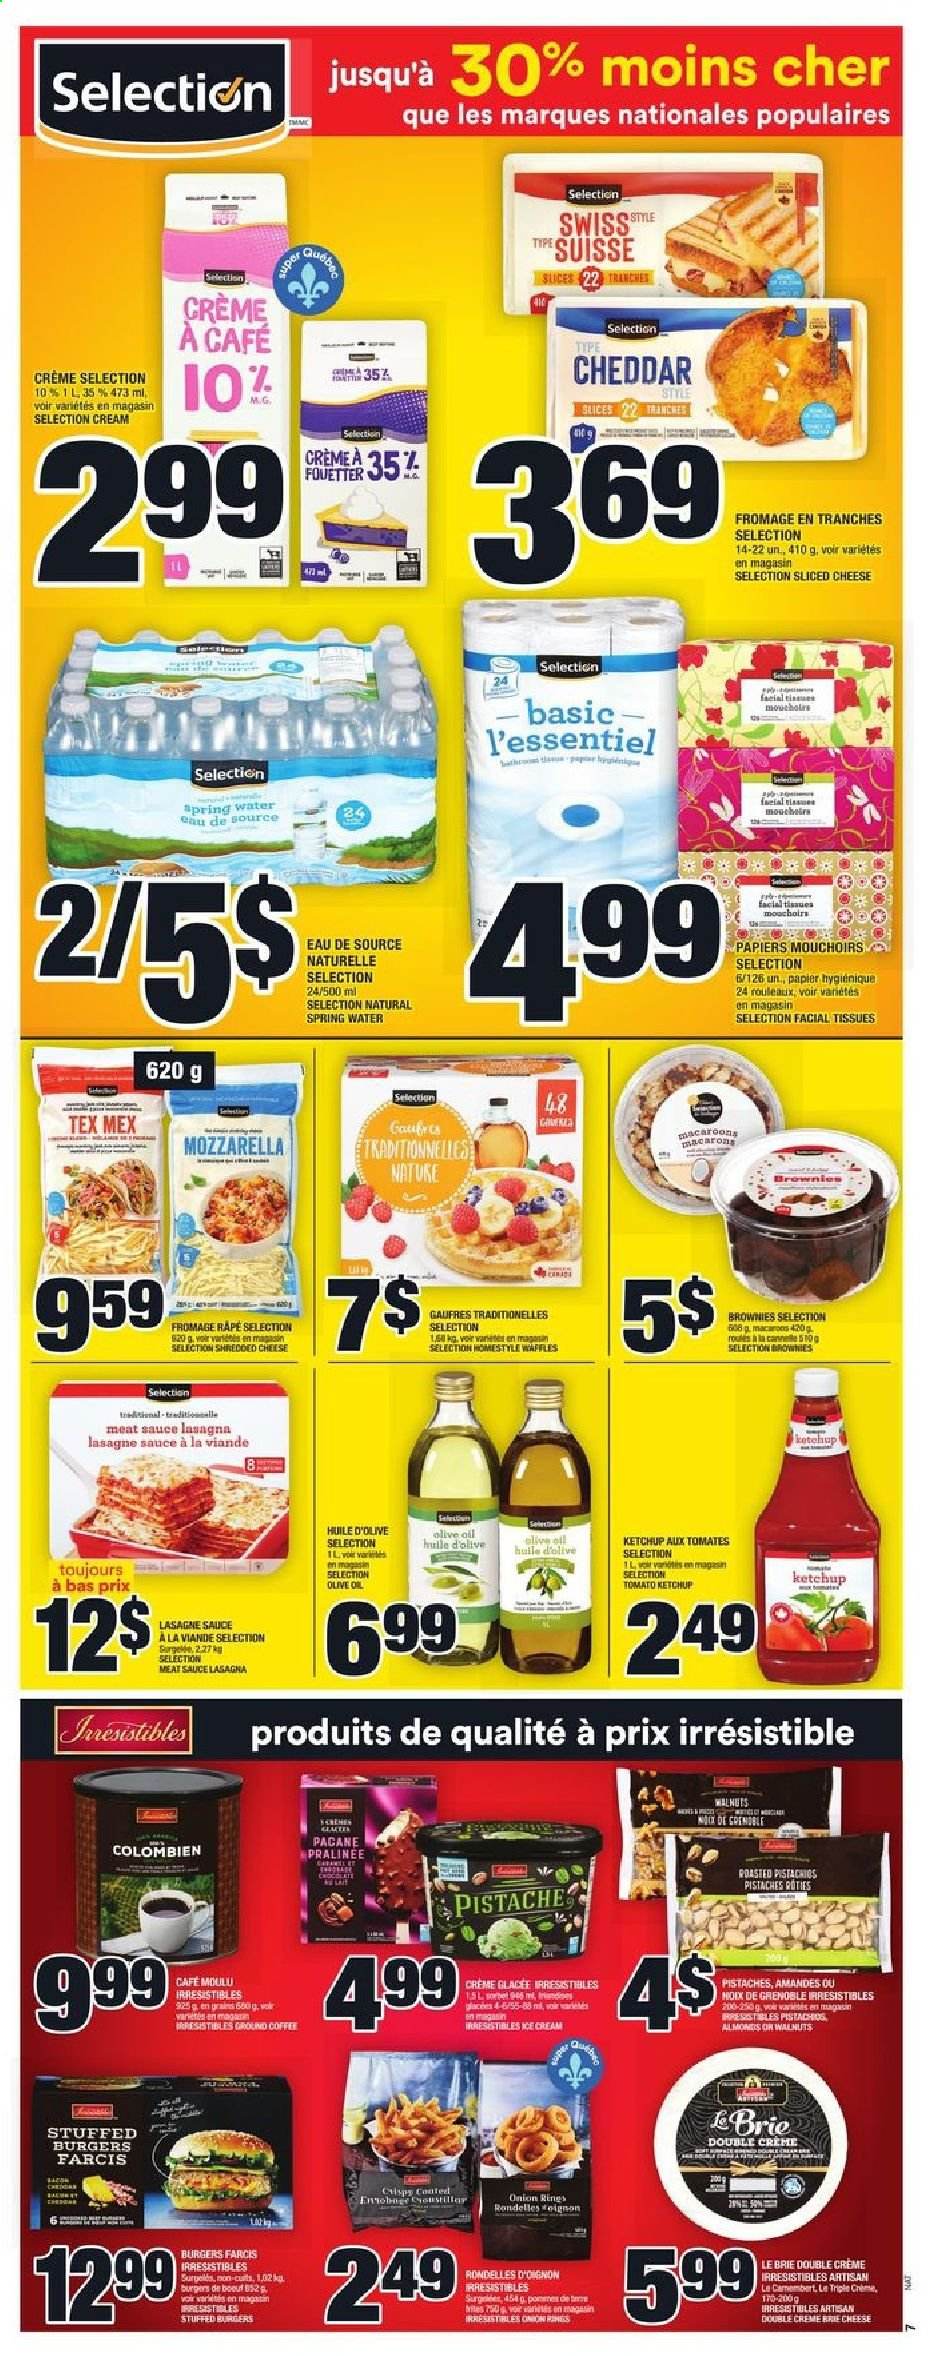 thumbnail - Super C Flyer - August 05, 2021 - August 11, 2021 - Sales products - brownies, waffles, onion rings, hamburger, sauce, lasagna meal, shredded cheese, sliced cheese, cheddar, brie, olive oil, oil, almonds, walnuts, pistachios, spring water, coffee, tissues, facial tissues, mozzarella. Page 8.